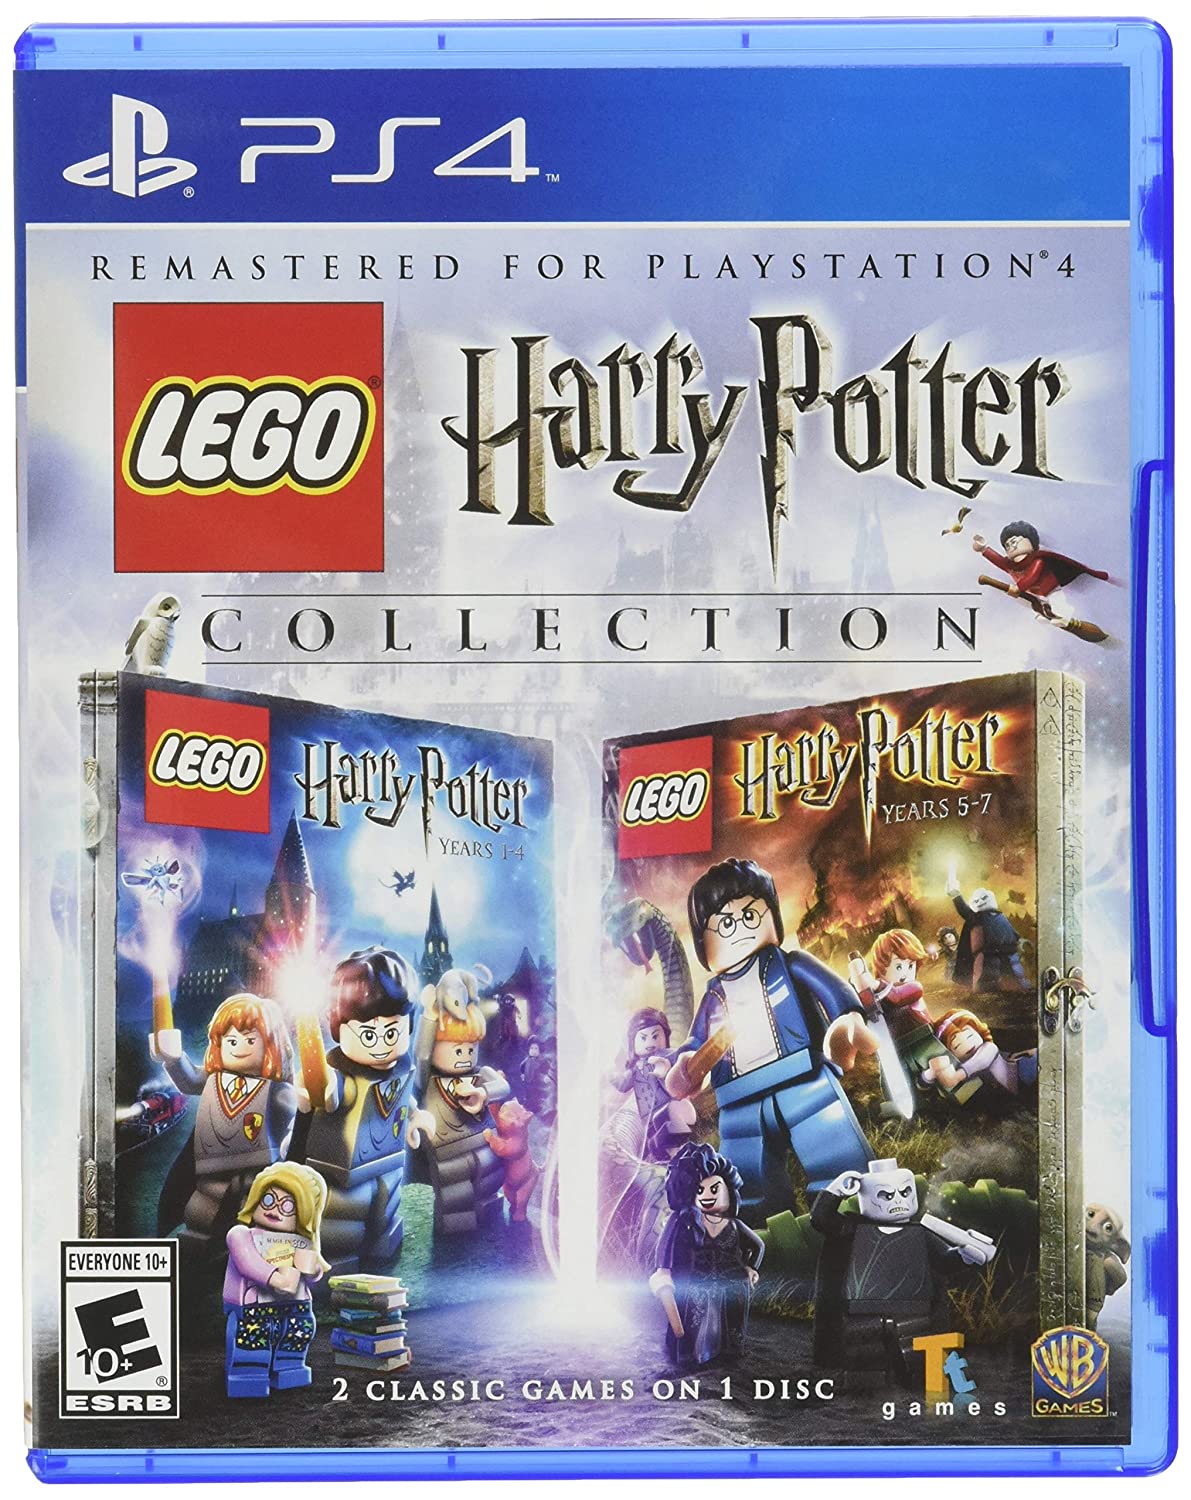 Lego Harry Potter Collection Adventure New Video Games Is for Everyone 10+ PlayStation 4 - image 1 of 8